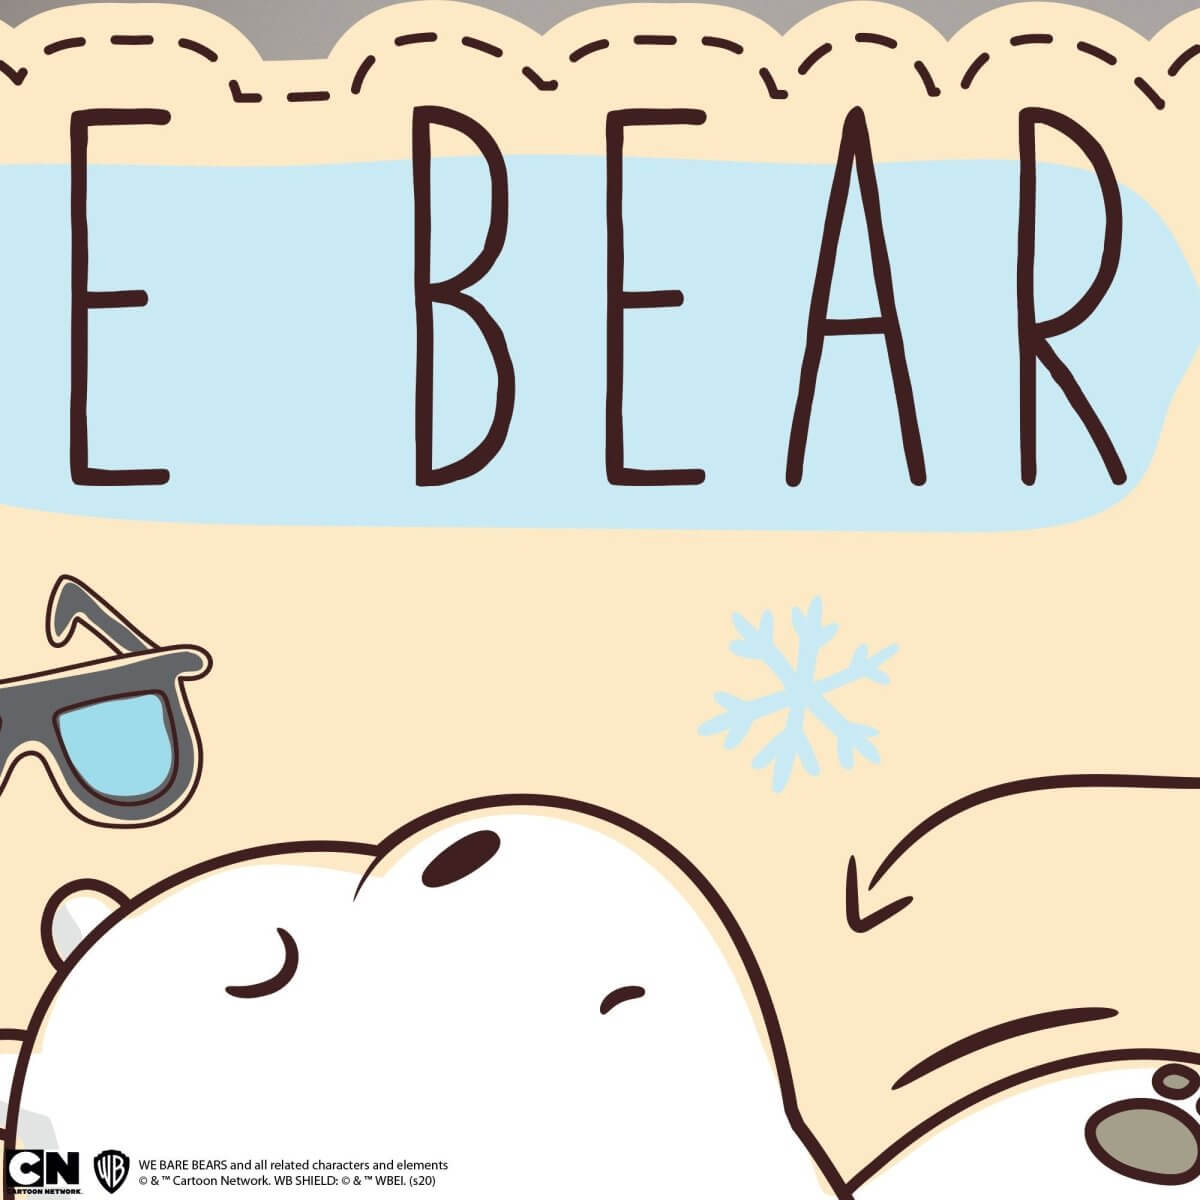 Kismet Decals Home & Room Decor We Bare Bears Get to Know Ice Bear Wall decal sticker - officially licensed - latex printed with no solvent odor - Kismet Decals